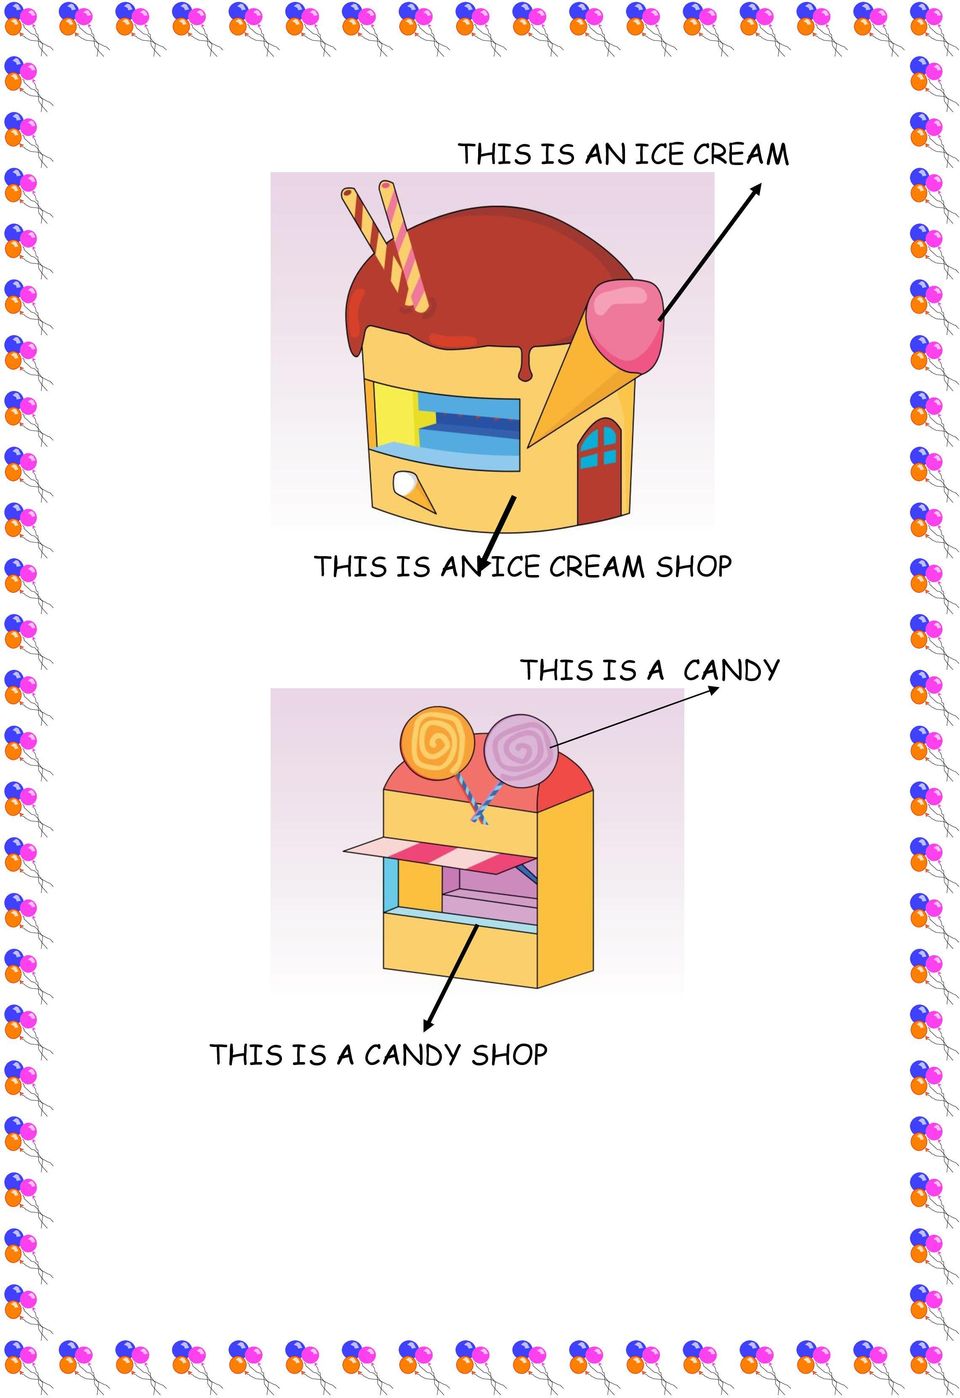 THIS IS A CANDY SHOP